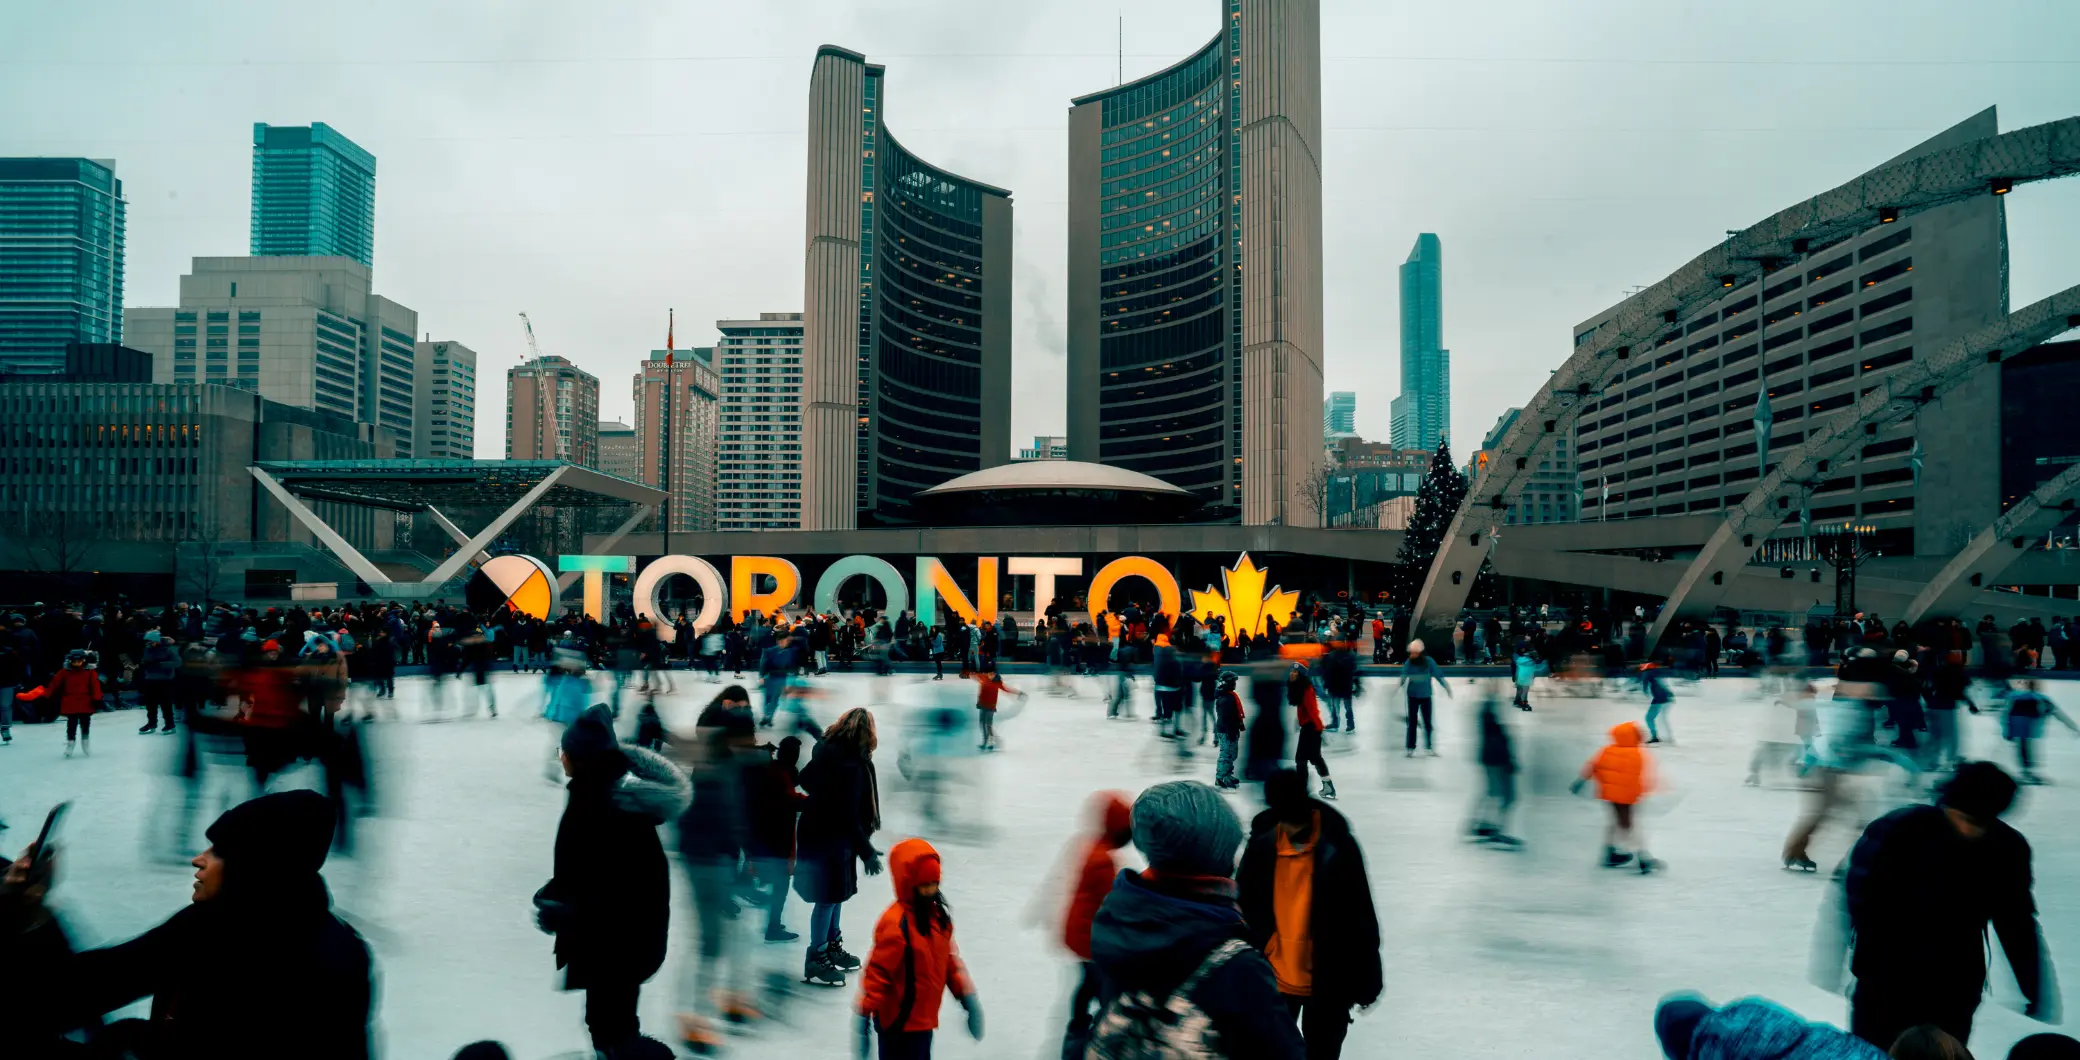 Toronto is finally getting a little break from freezing temperatures ...